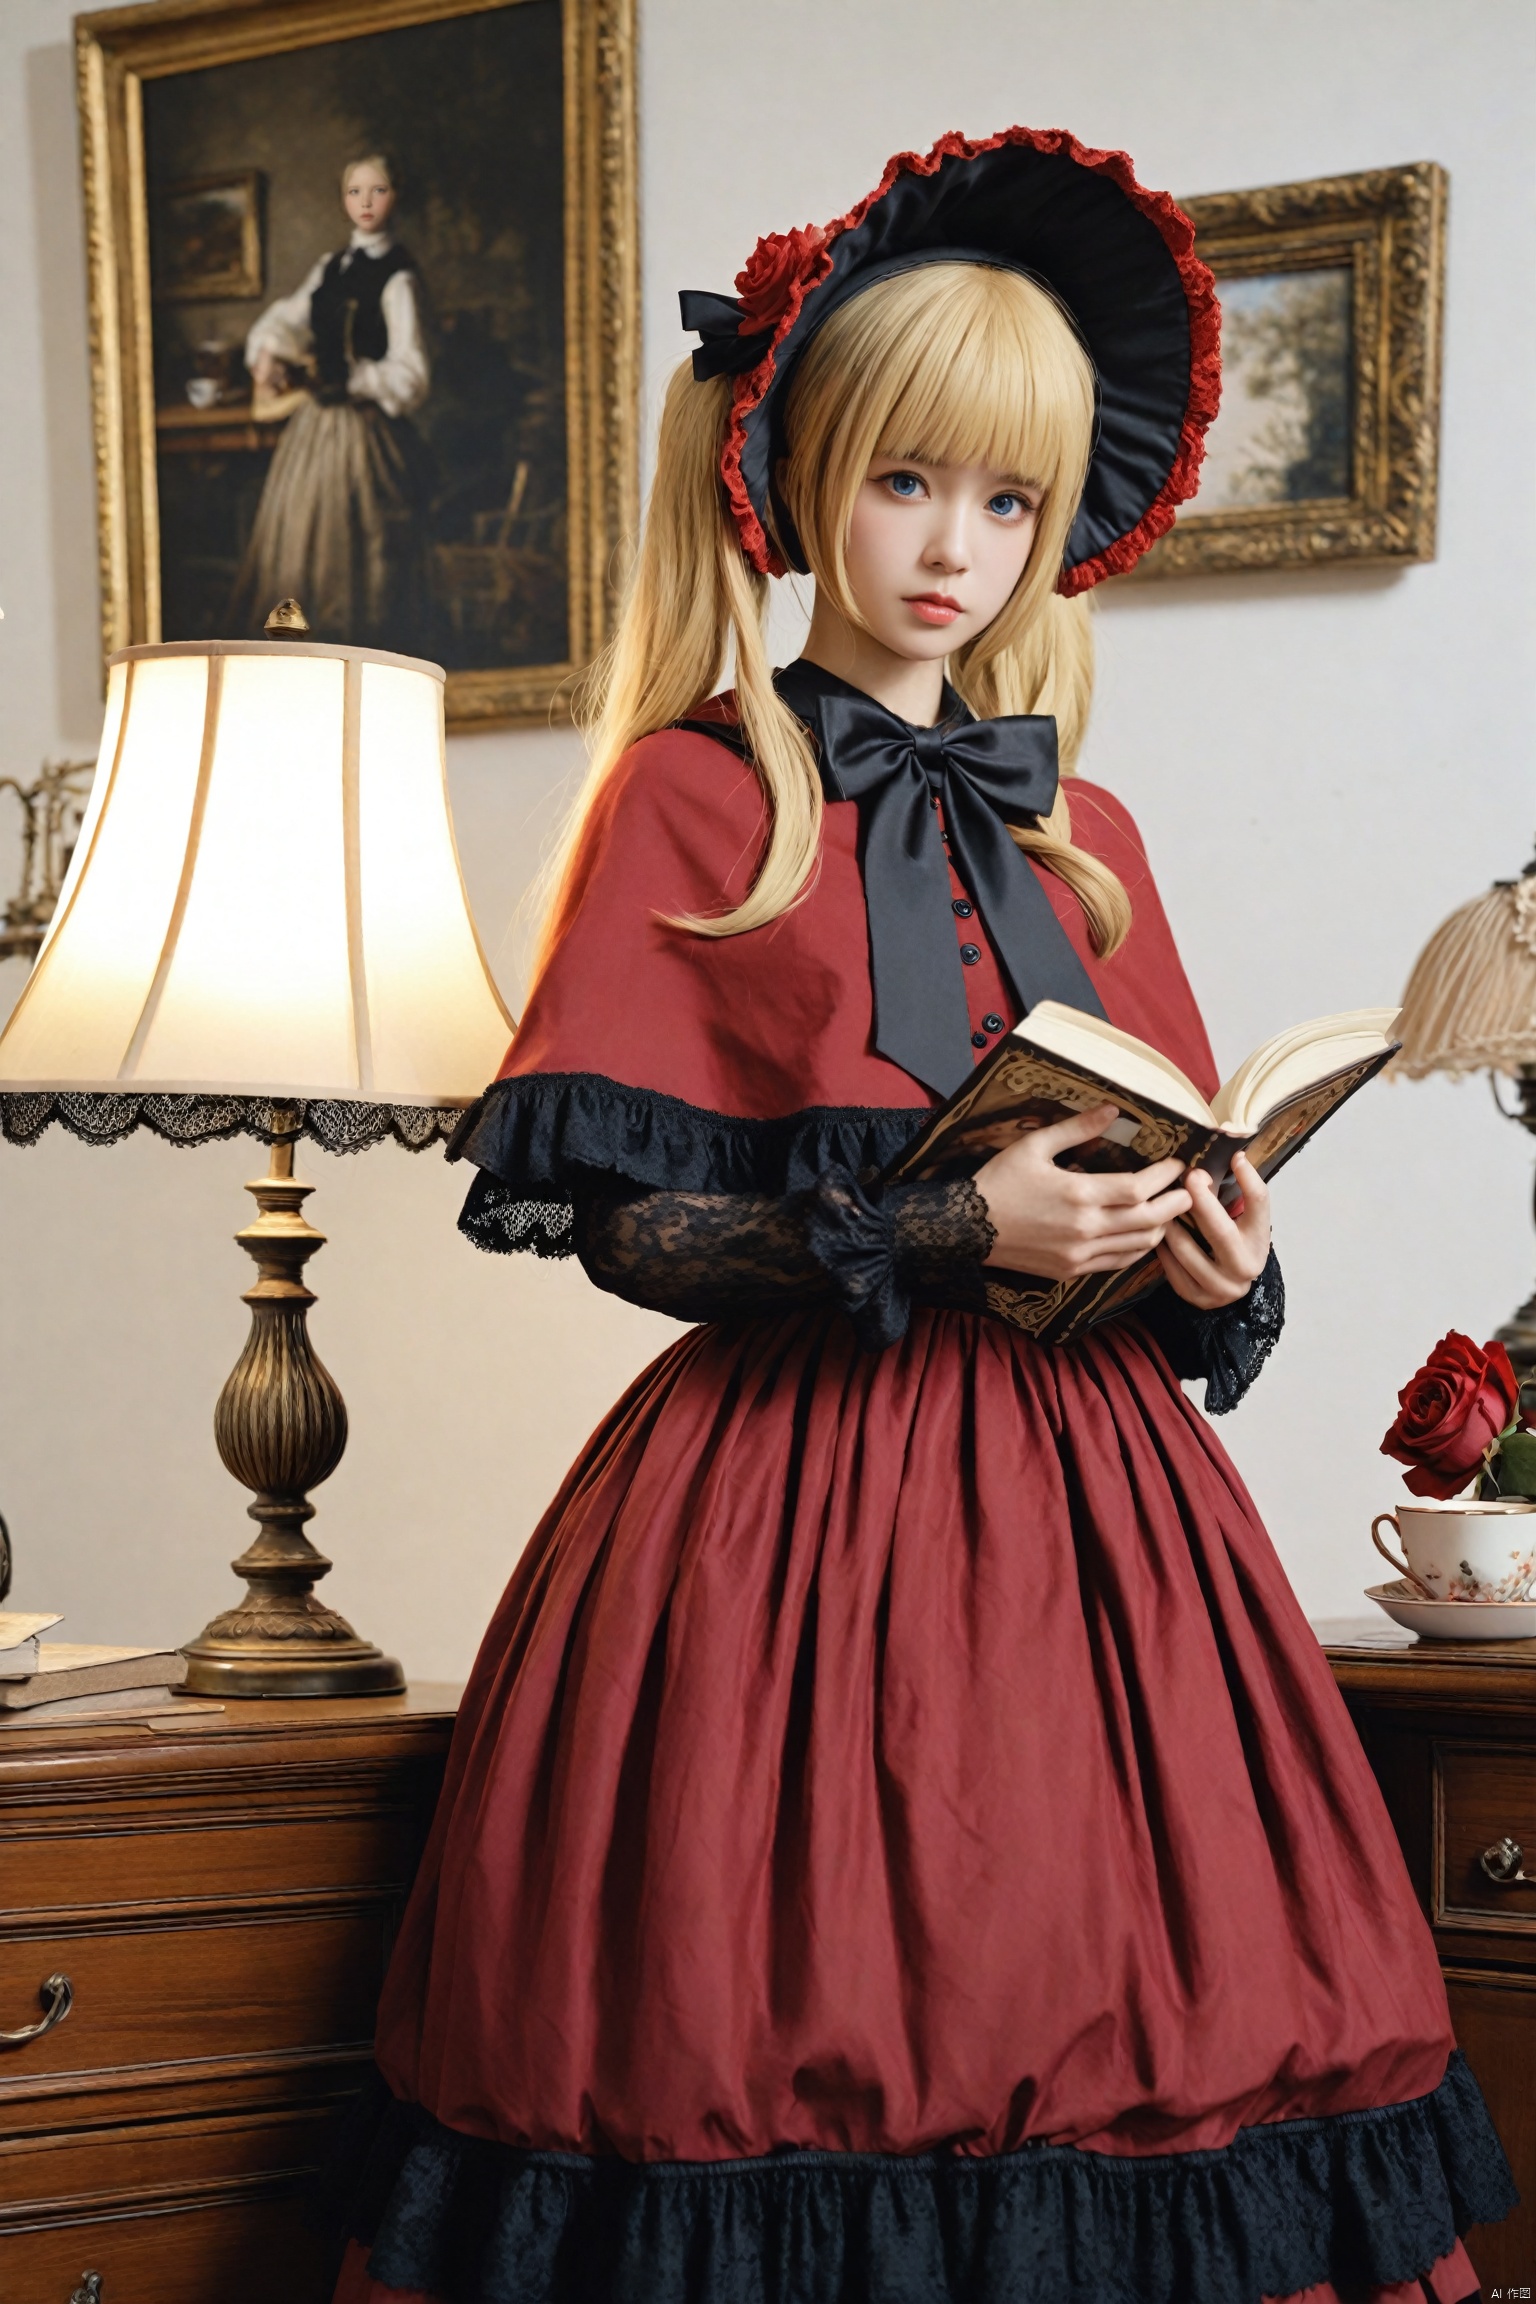 masterpiece,Realism,best quality,loli,1girl,blonde hair,shinku,dress,book,blue eyes,solo,bonnet,bow,holding,flower,lamp,rose,looking at viewer,long hair,red dress,black bow,frills,bowtie,realistic,long sleeves,indoors,frilled dress,cup,lips,lolita fashion,red headwear,capelet,lace trim,twintails,holding book,black bowtie,teacup,open book,lace,red flower,picture frame,standing,closed mouth,hat,painting (object),red rose,lace-trimmed sleeves,blunt bangs,nose,ribbon,head tilt,desk lamp,